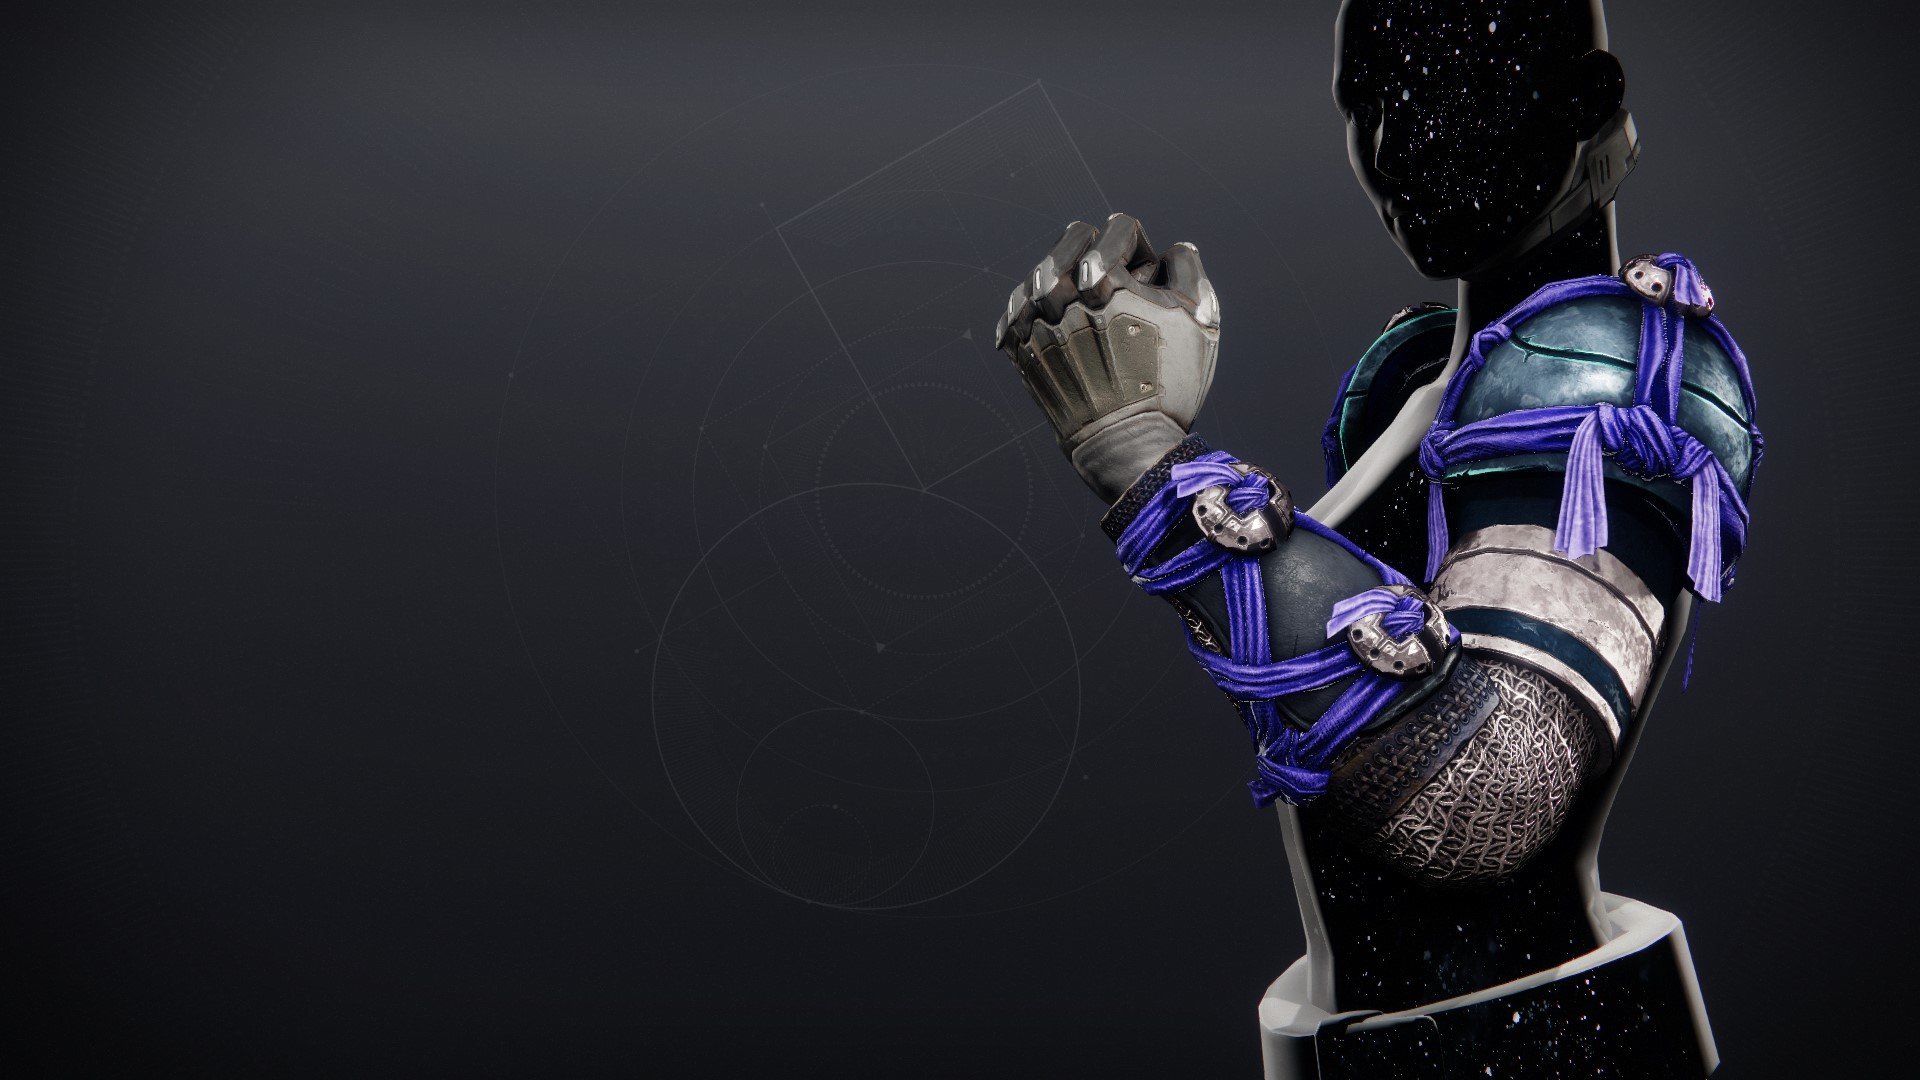 An in-game render of the Wyrmguard Gauntlets.